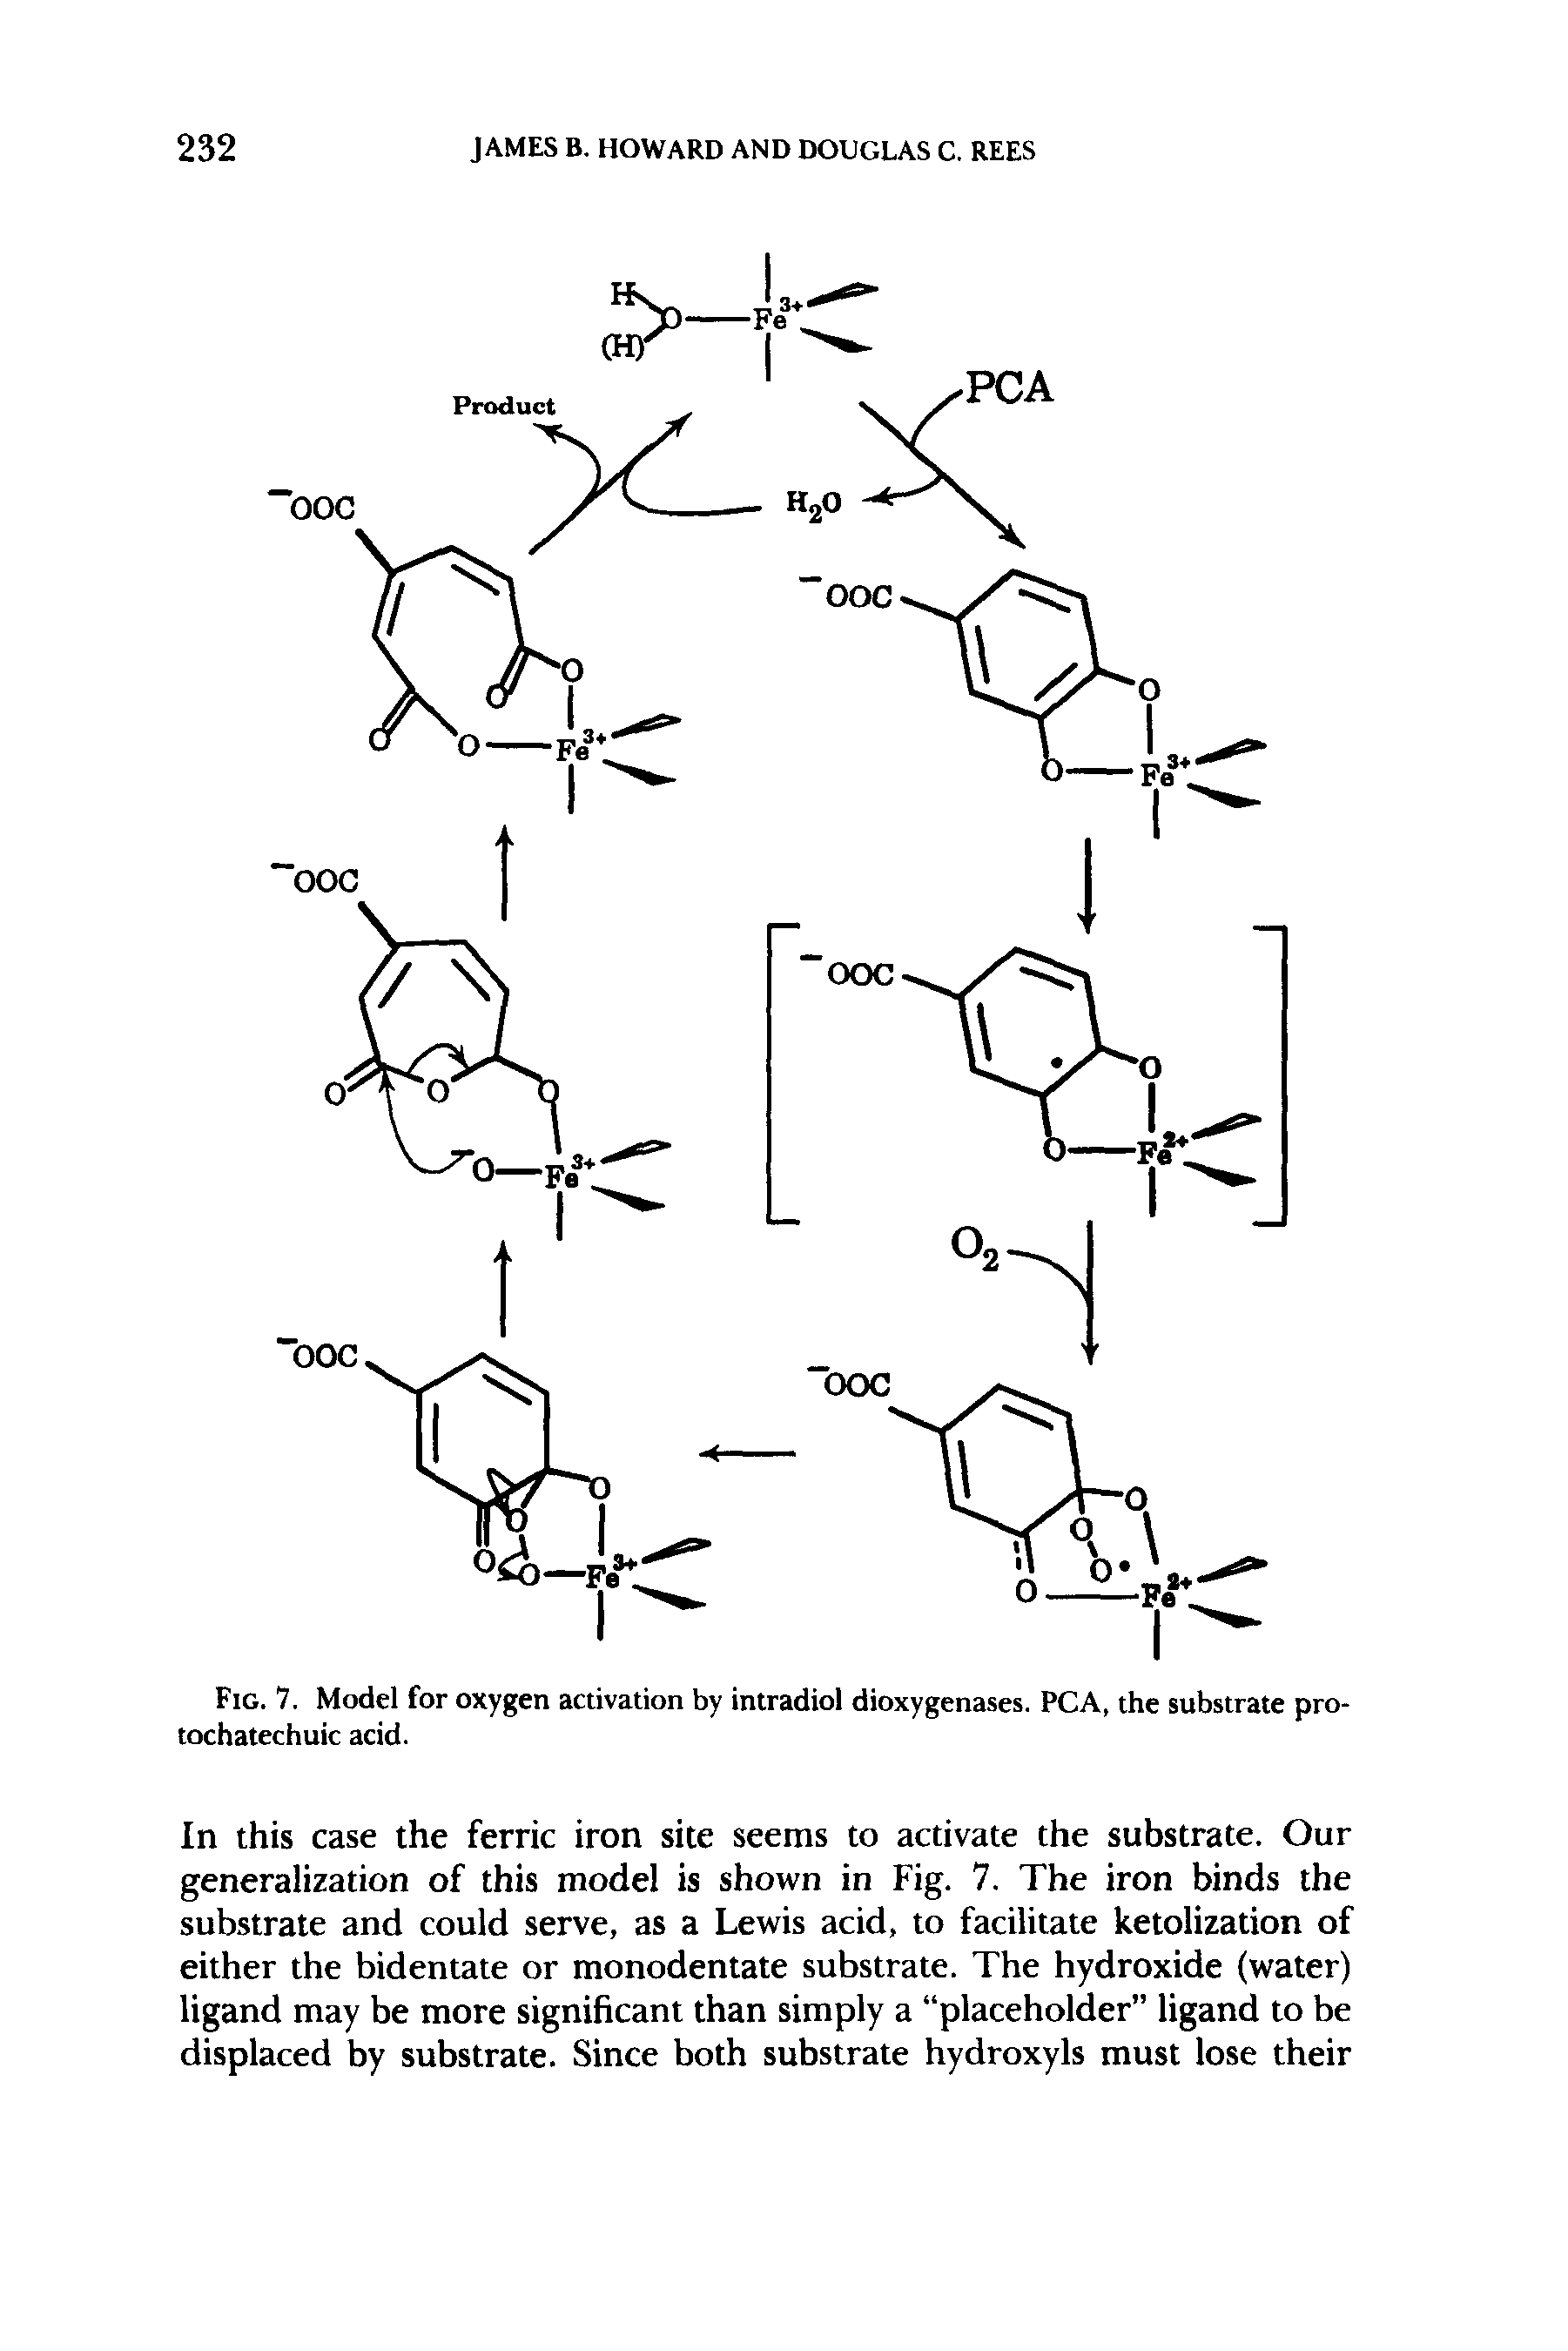 Fig. 7. Model for oxygen activation by intradiol dioxygenases. PCA, the substrate pro-tochatechuic acid.